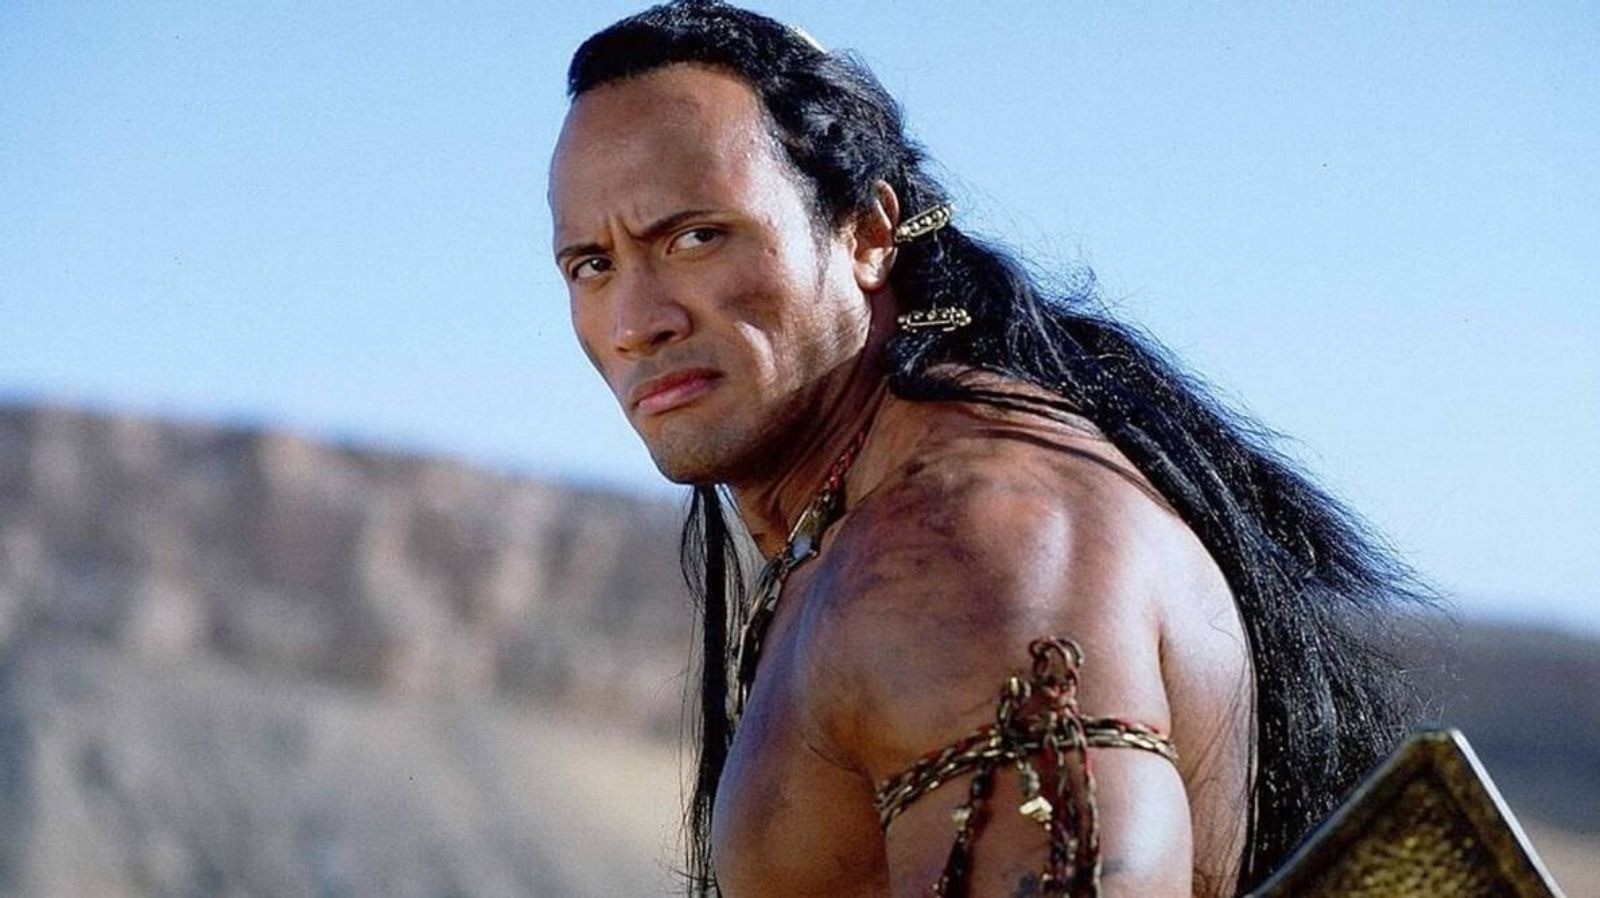 Dwayne Johnson in the prologue of The Mummy Returns